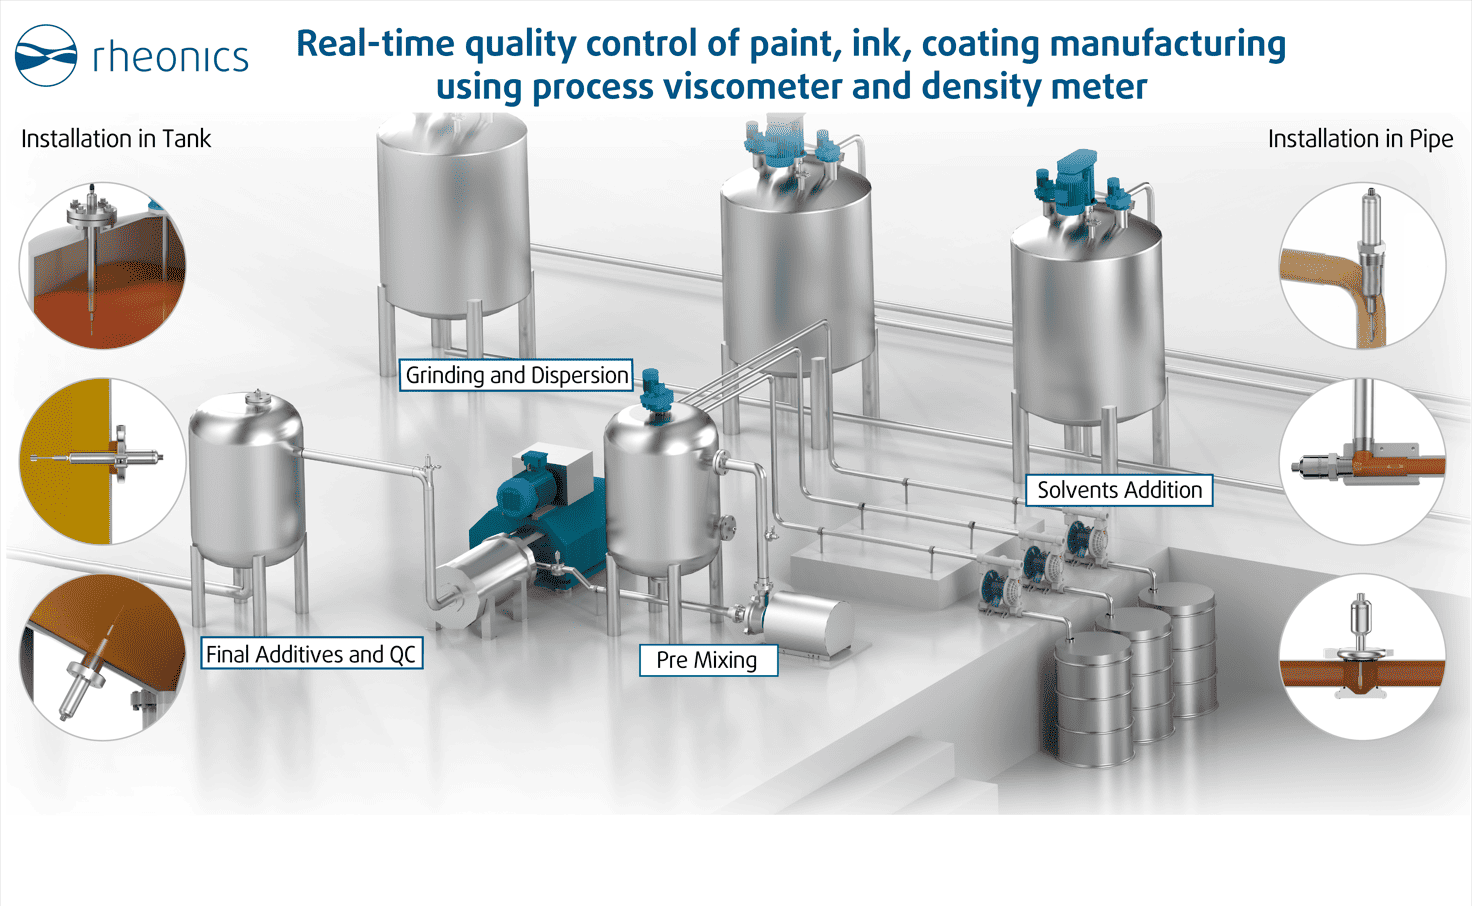 Rheonics viscometer SRV and density meter SRD used for real time quality control of paint, ink and coating